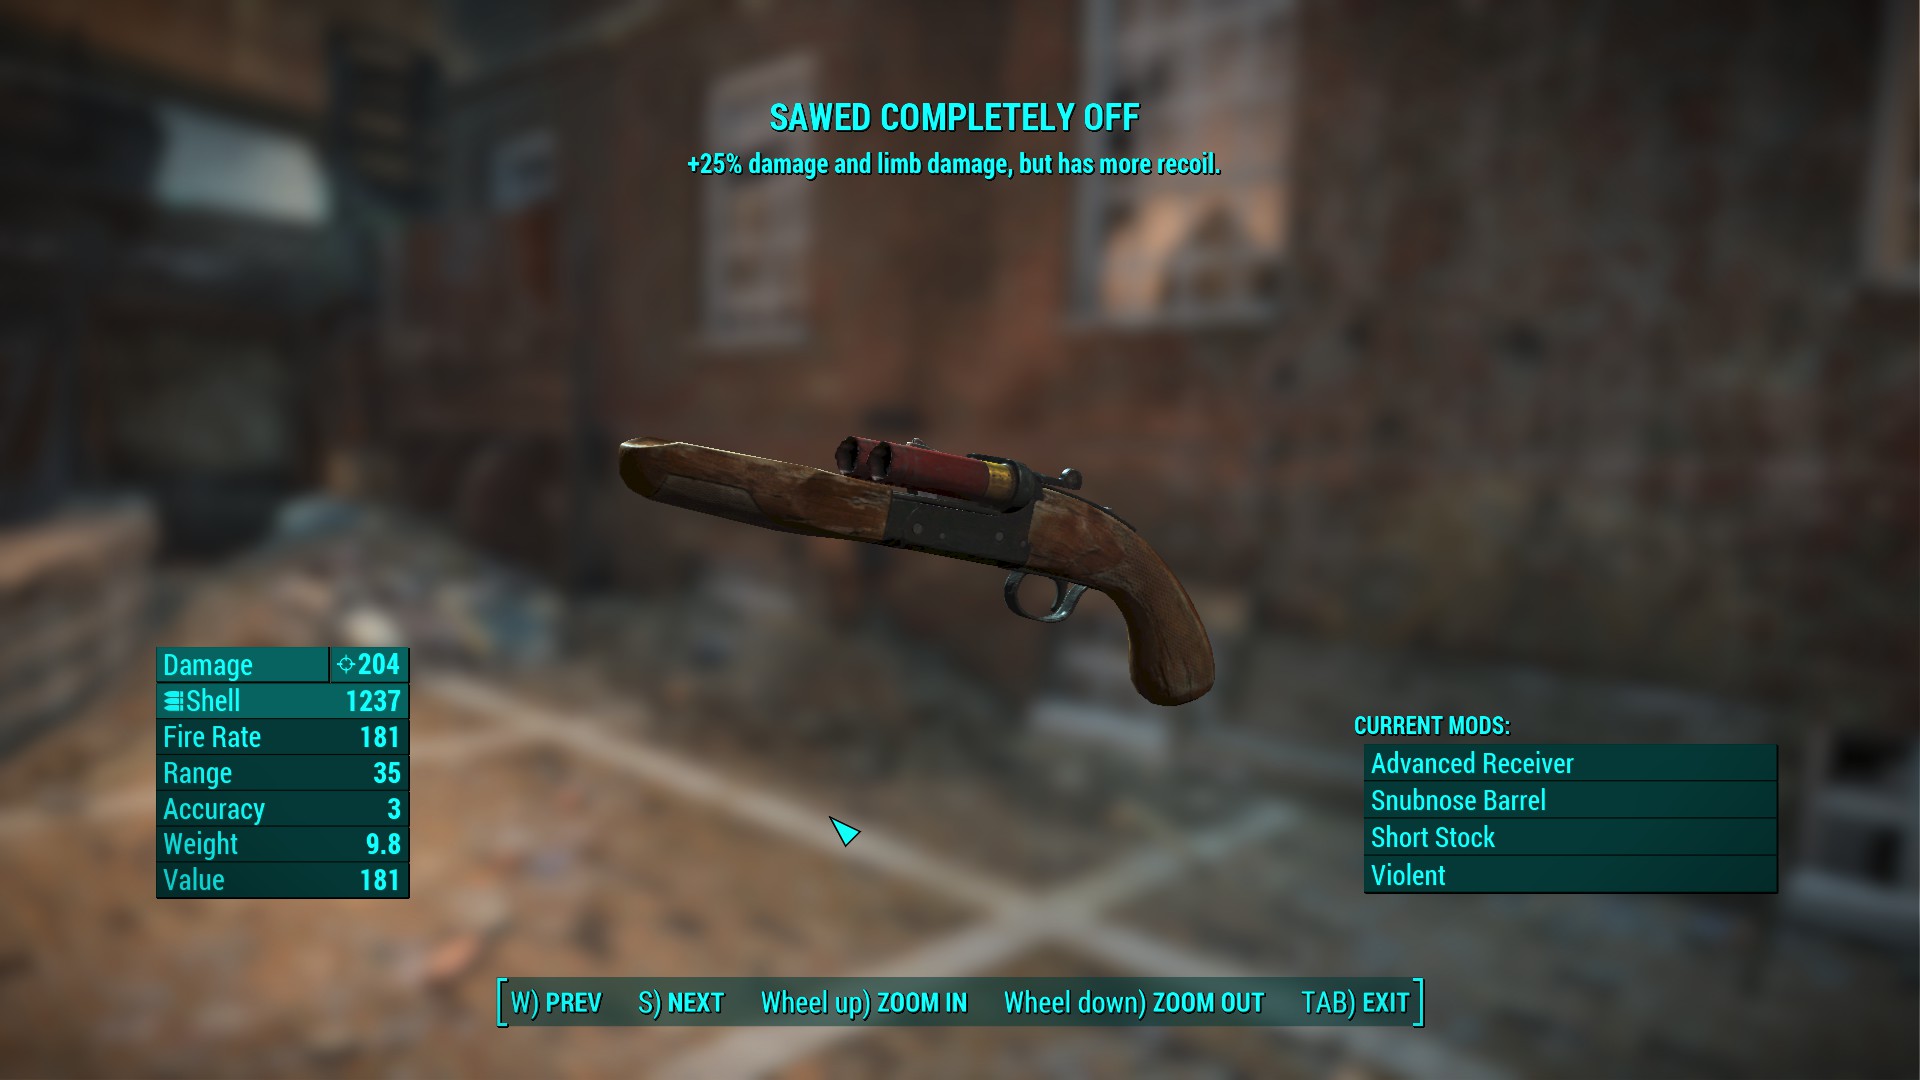 sawed completely off fallout 4 - Sawed Completely Off 25% damage and limb damage, but has more recoil. Damage Shell Fire Rate Range Accuracy Weight Value 0204 1237 181 35 3 Current Mods Advanced Receiver Snubnose Barrel Short Stock Violent 9.8 181 W Prev 